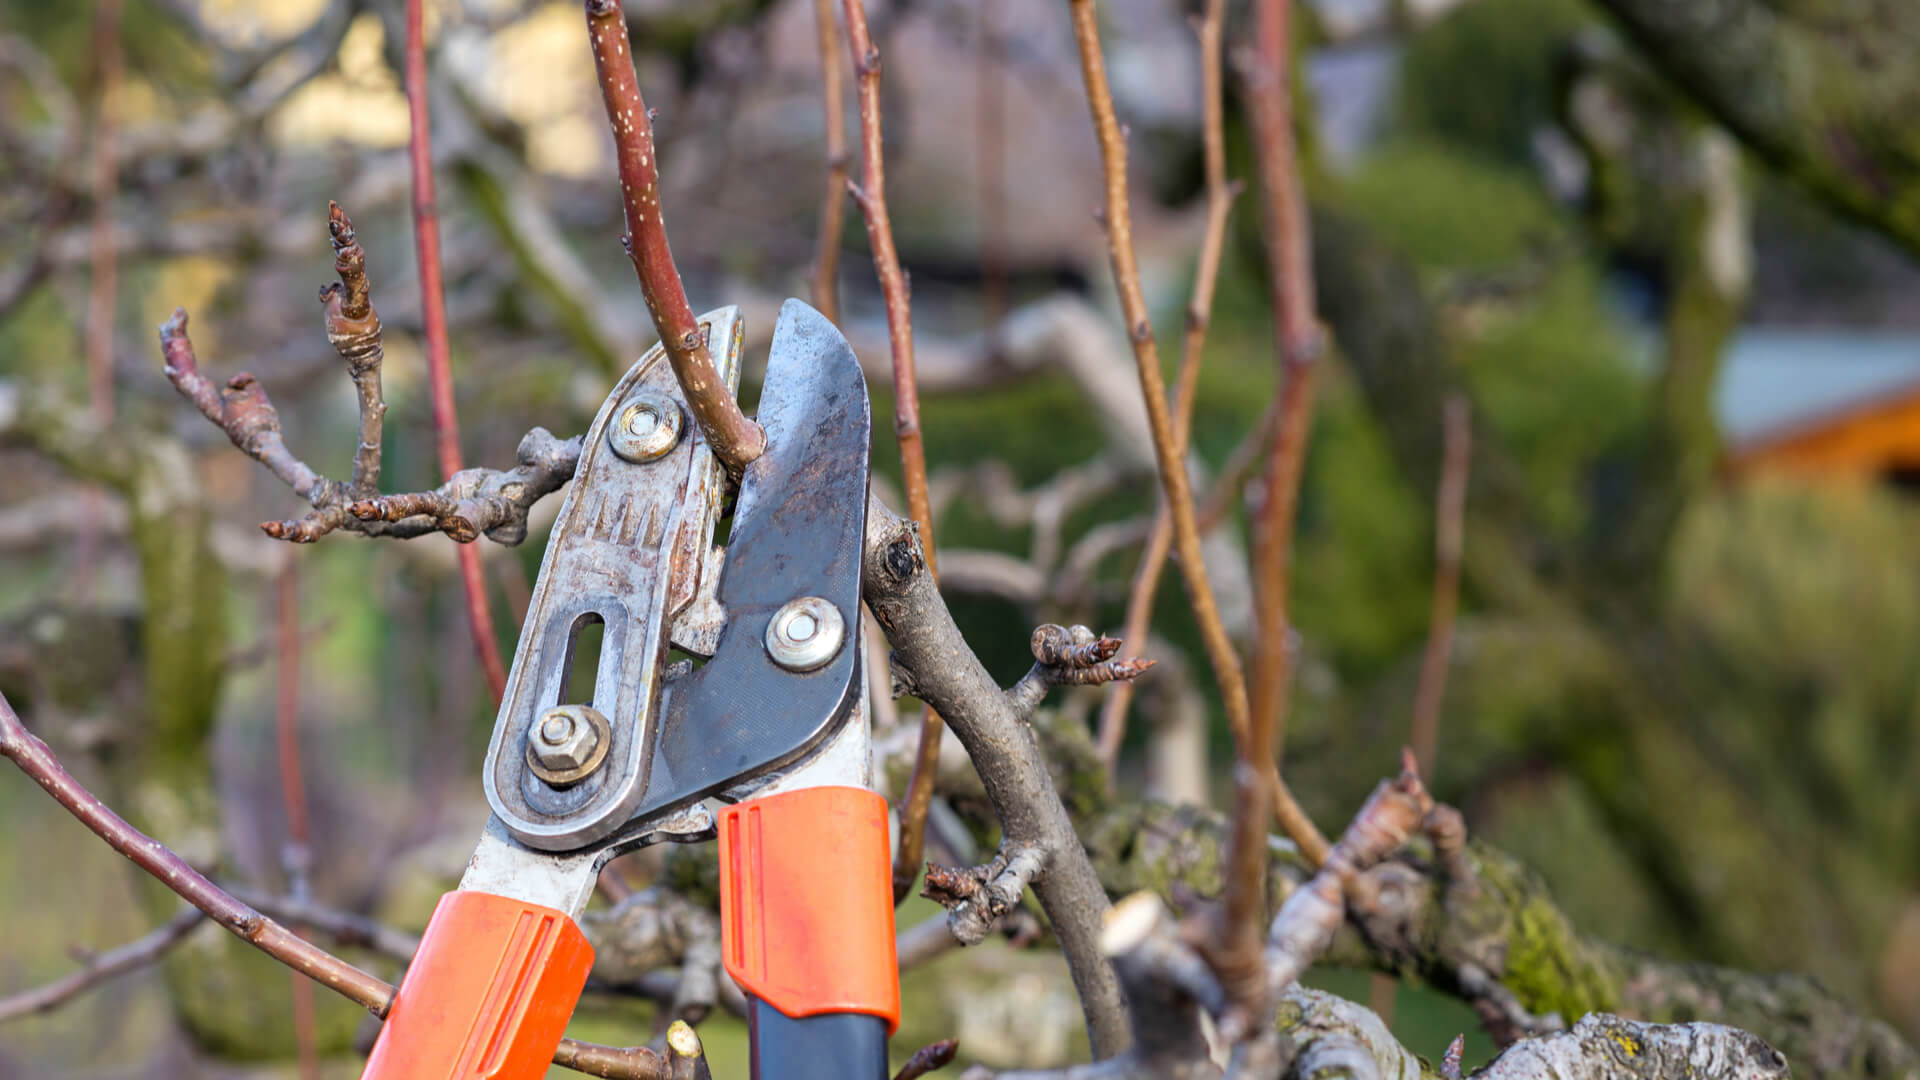 Pro Lawn Care in Frisco TX: Winter is the Best time to Prune Shrubs and Trees!